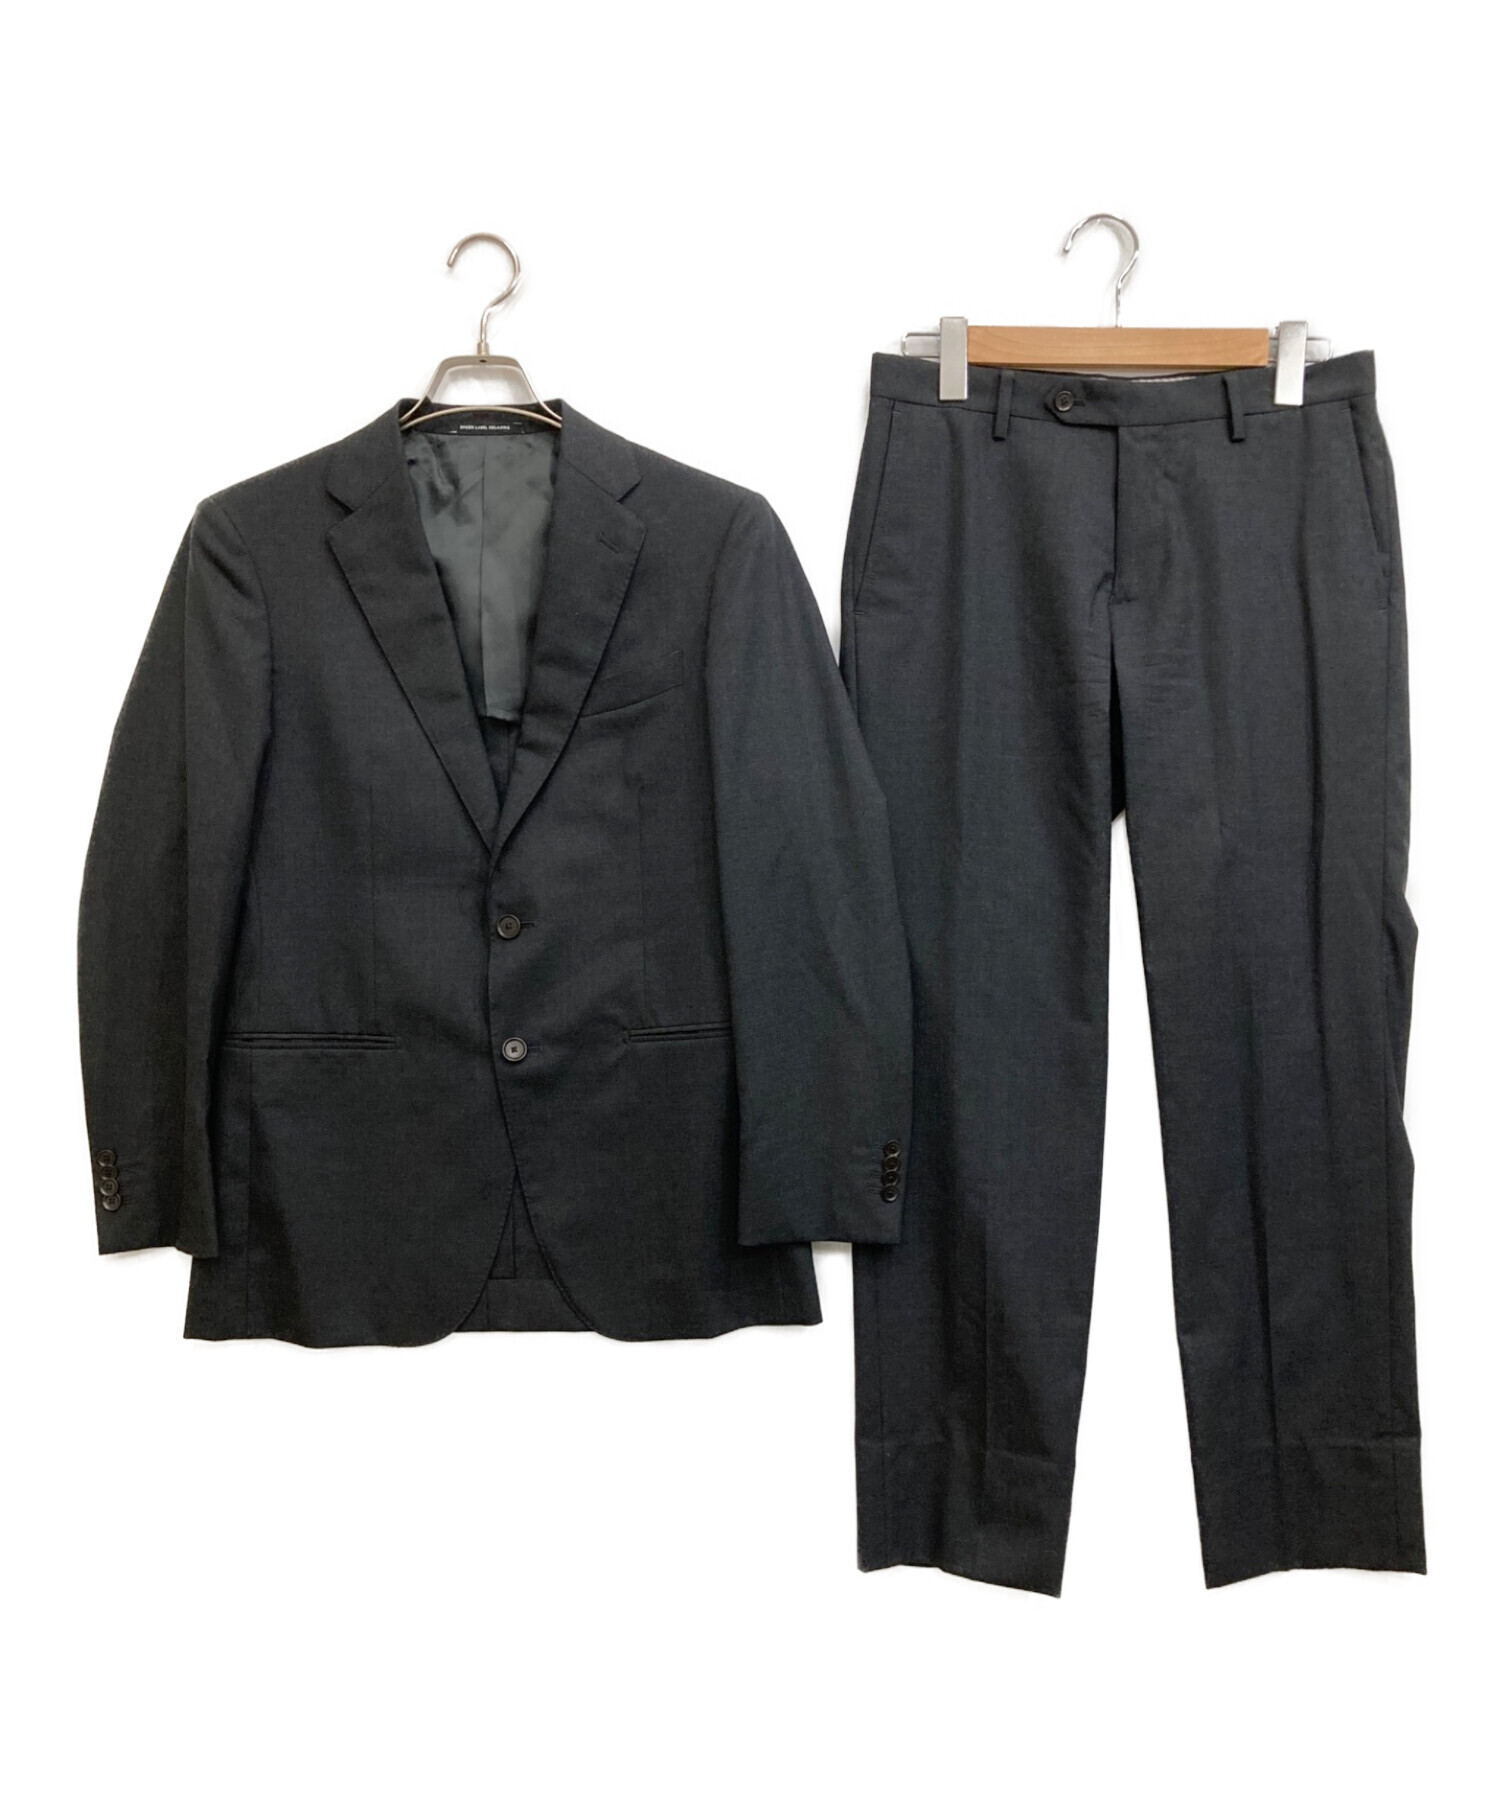 green label relaxing size44 セットアップ - スーツ